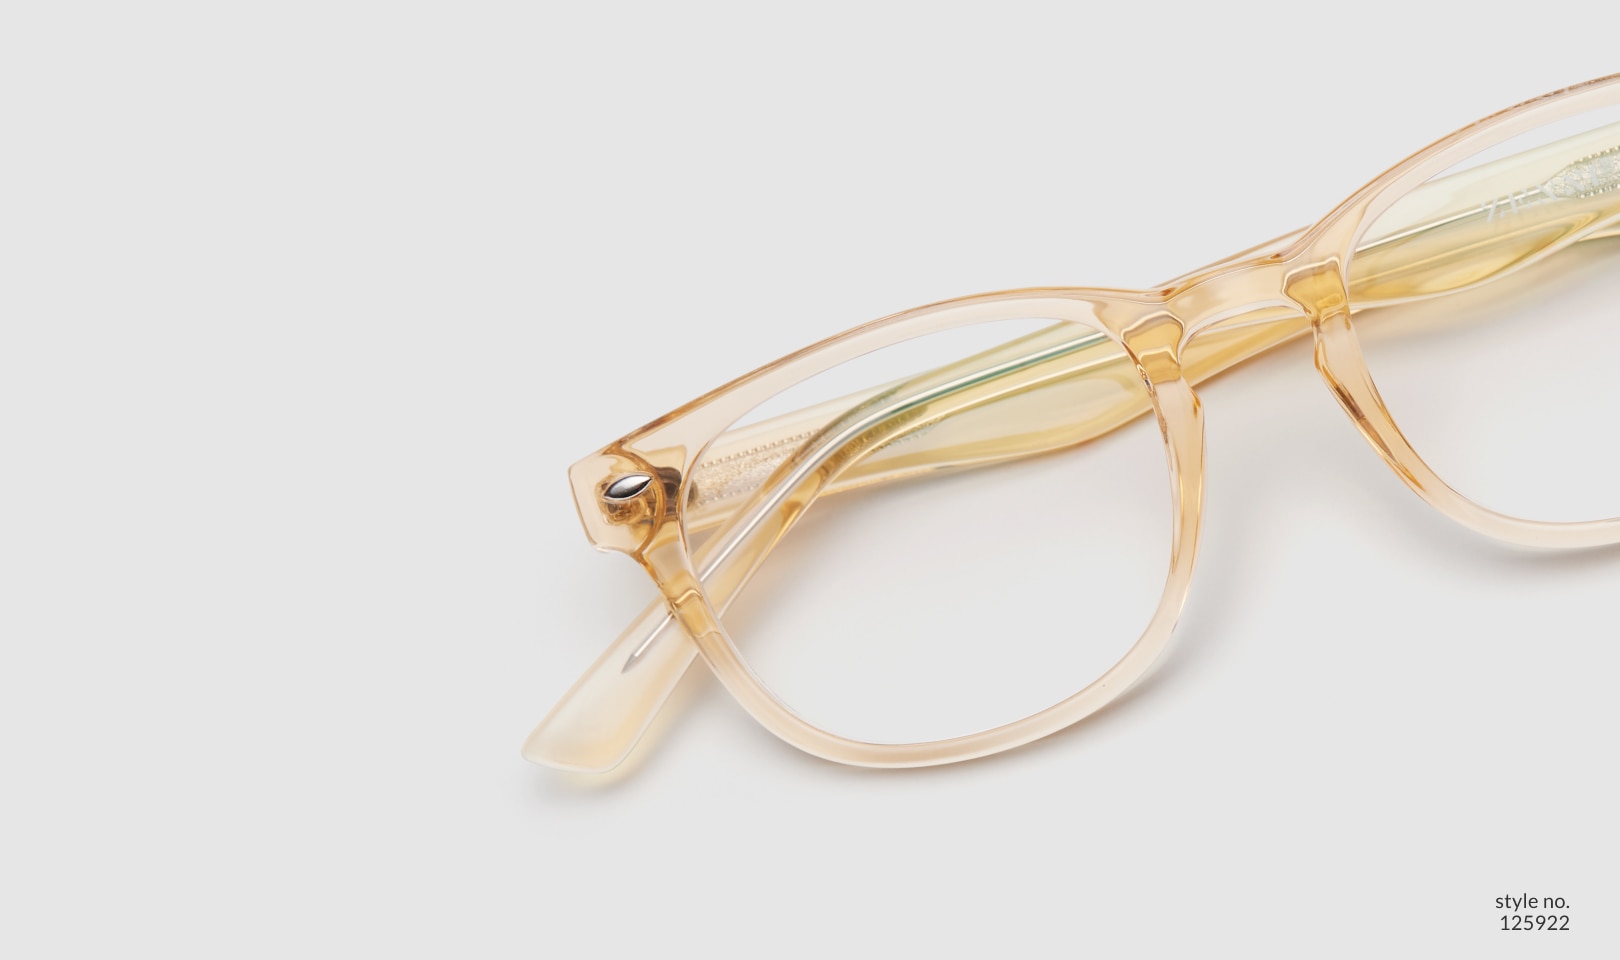 Image of Zenni yellow translucent oval glasses style #125922 shown with a light gray background.